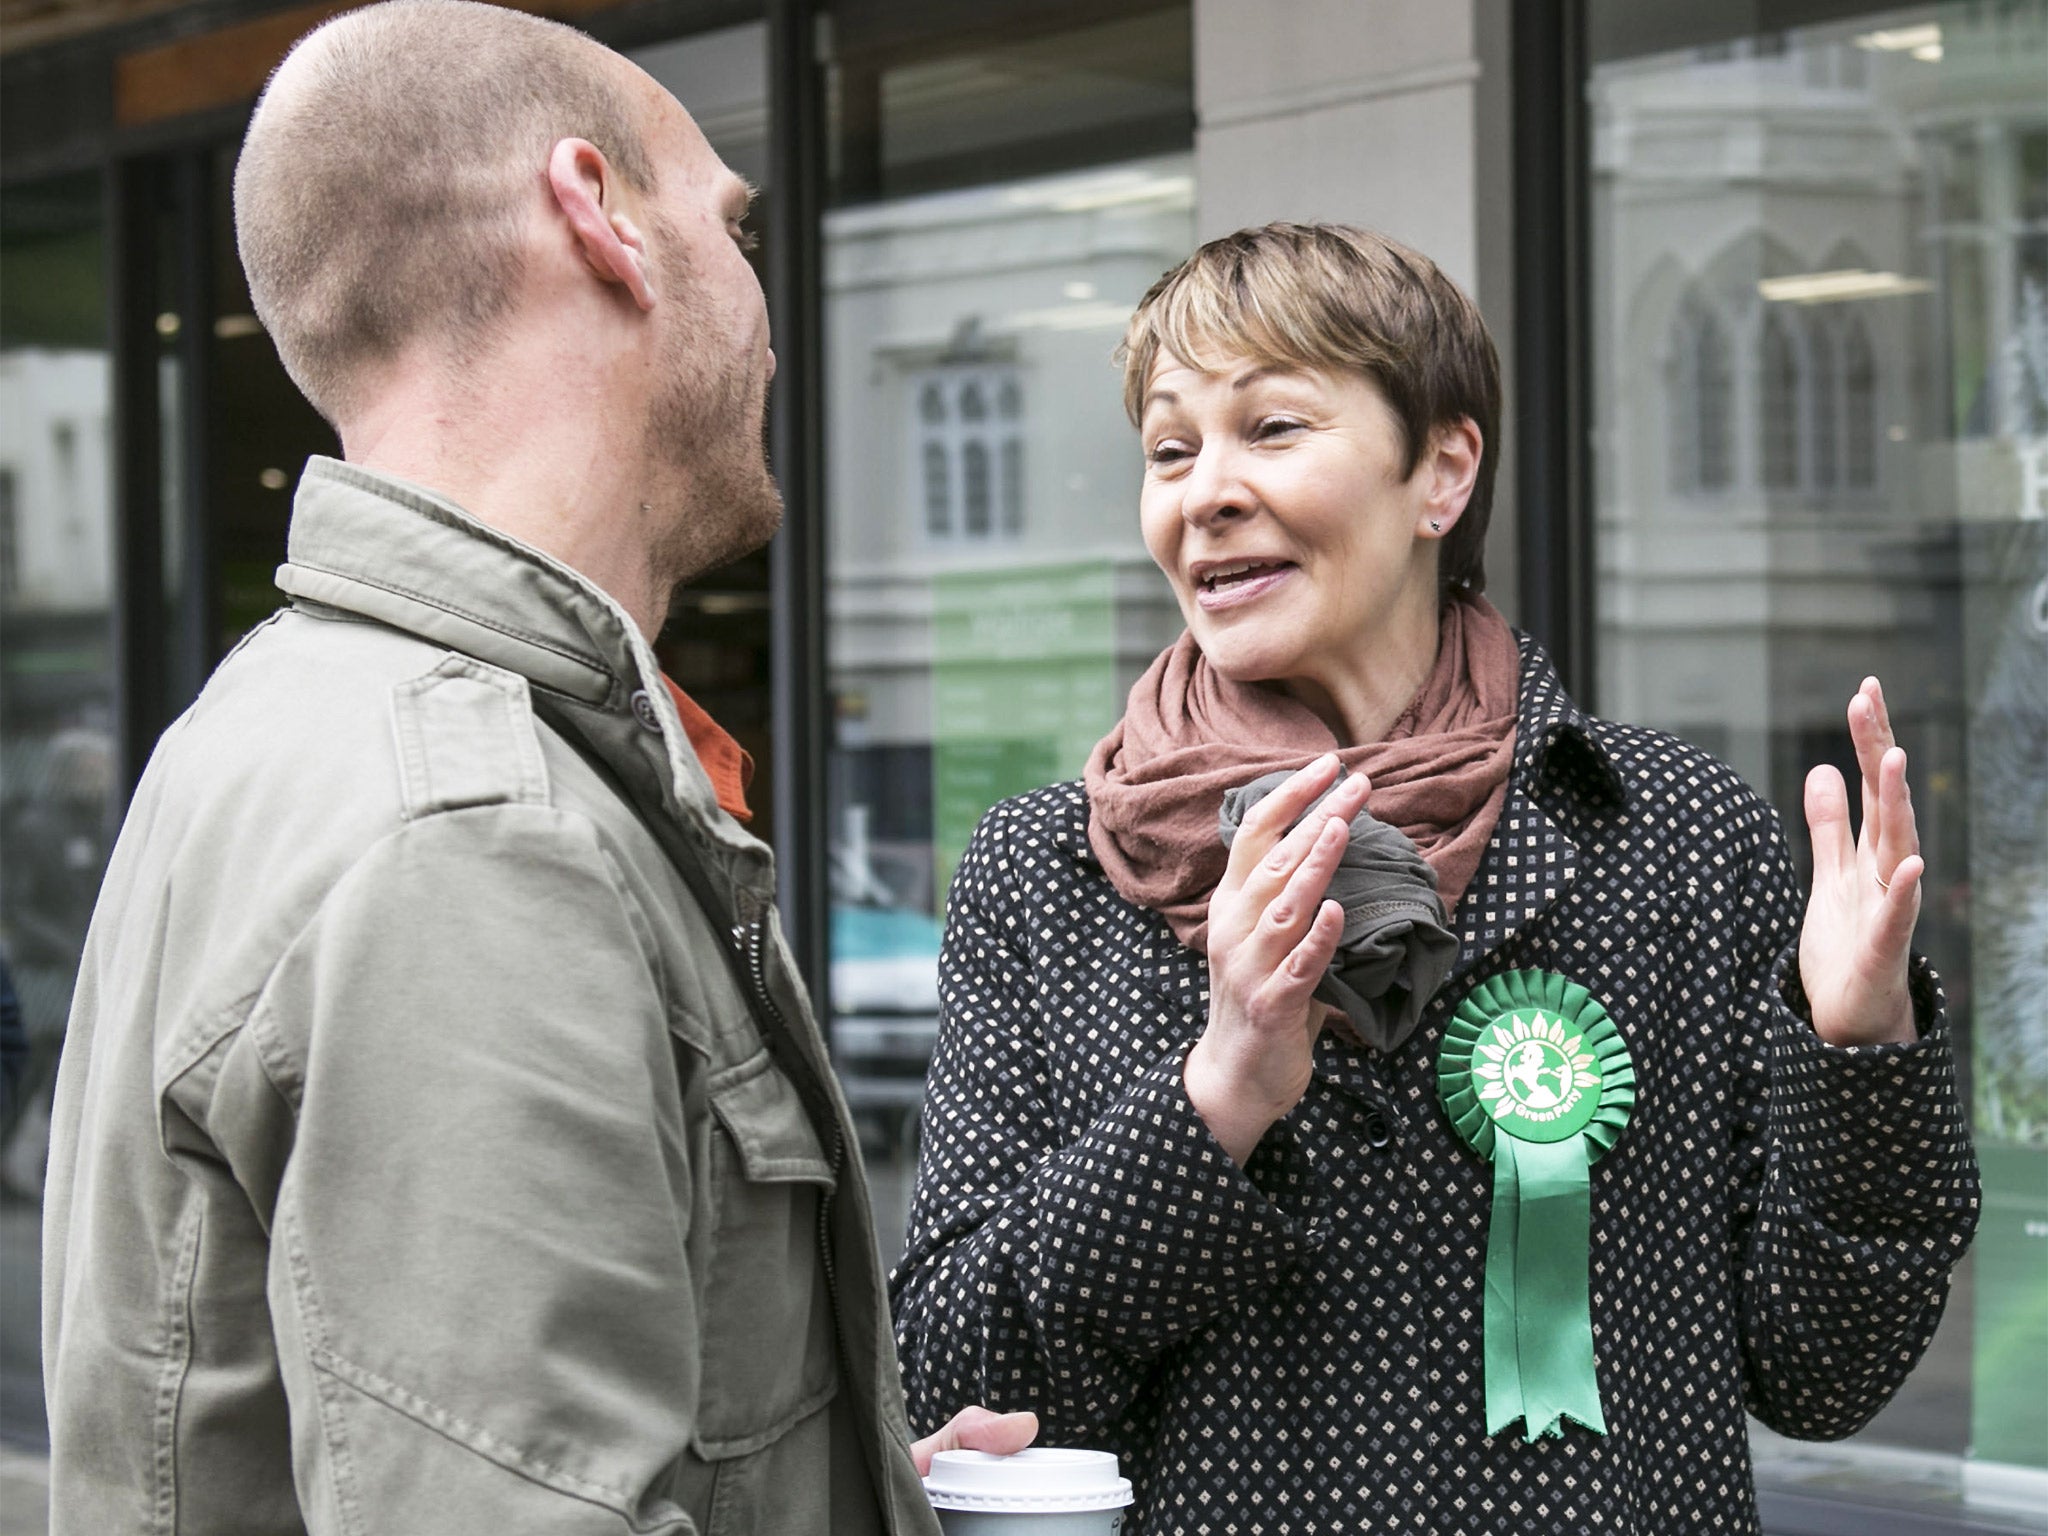 The Green Party candidate Caroline Lucas campaigning on the streets of Brighton